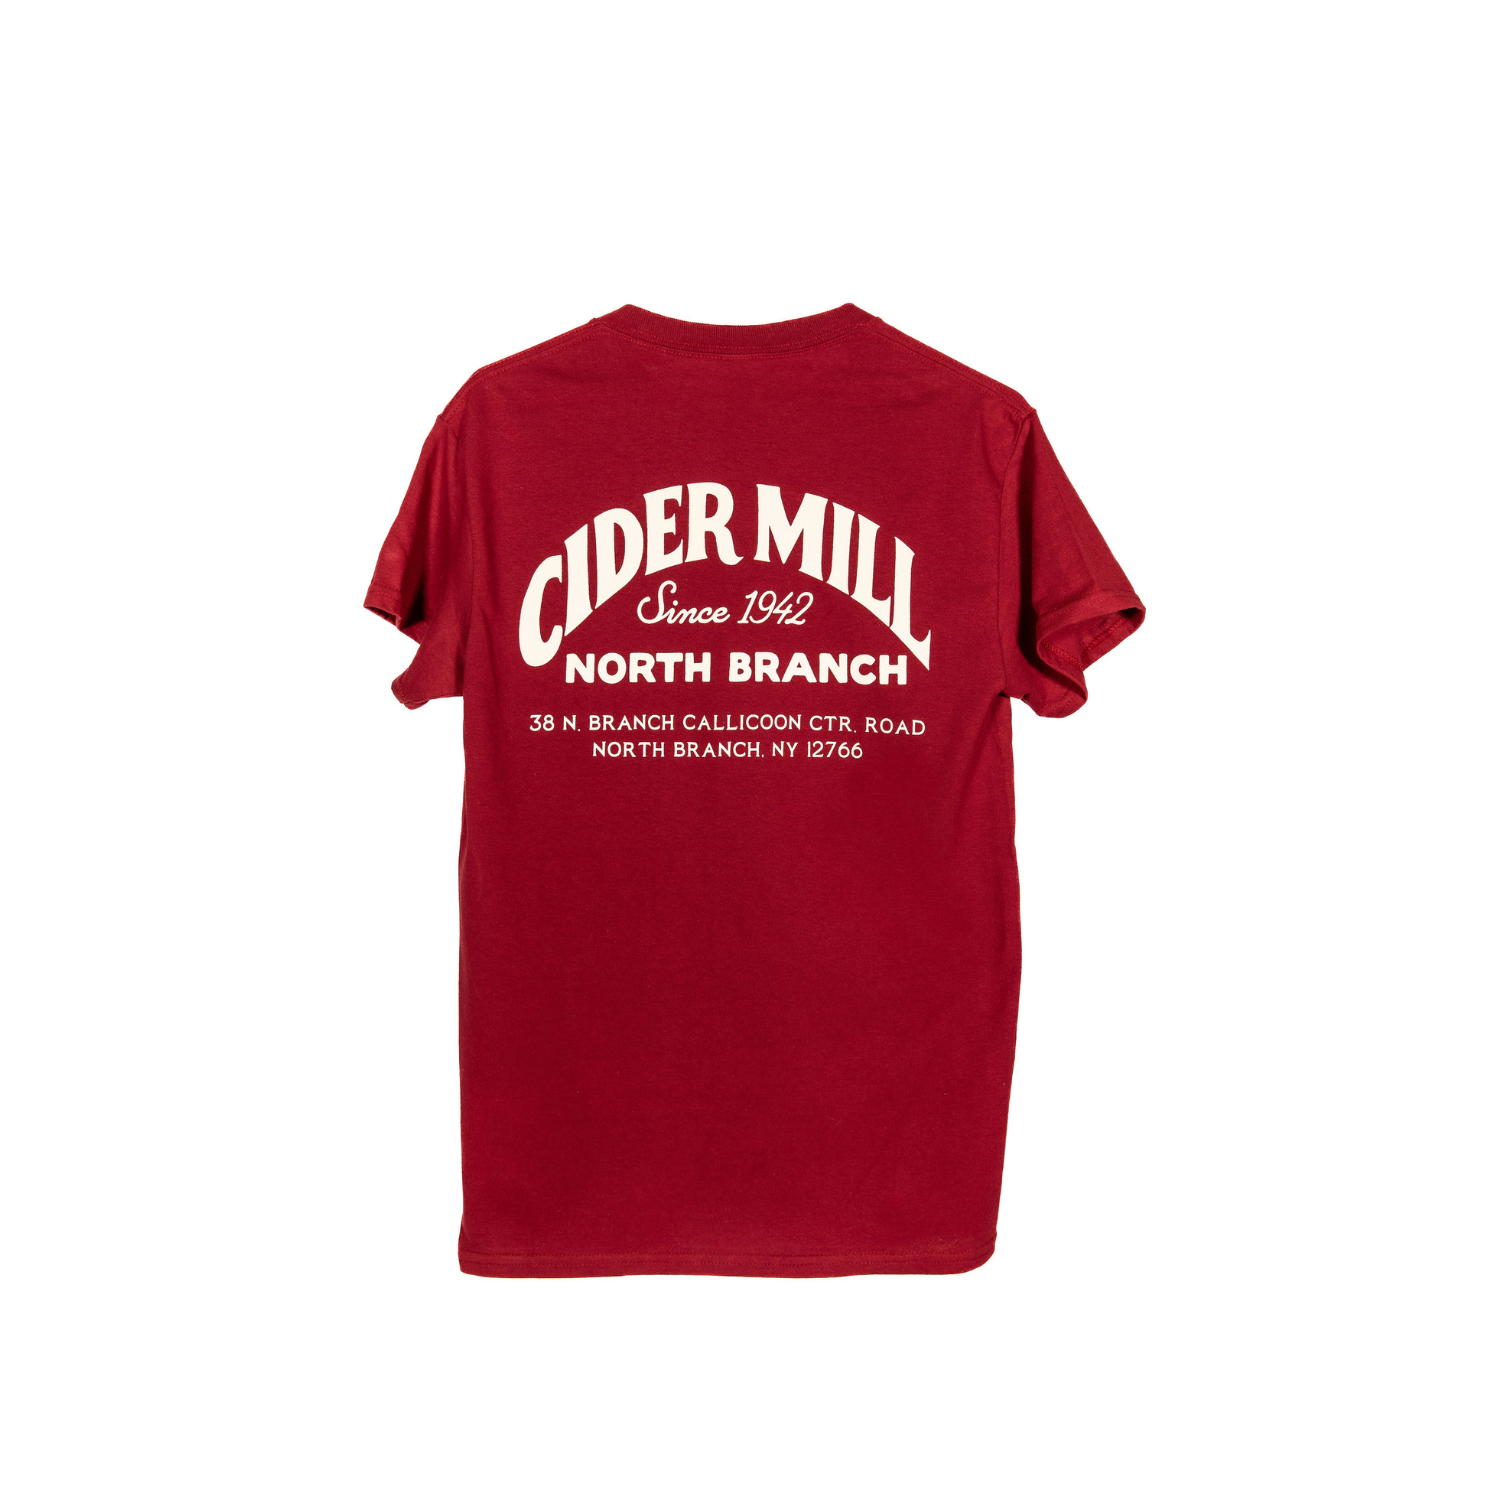 Cider Mill T-Shirt Red